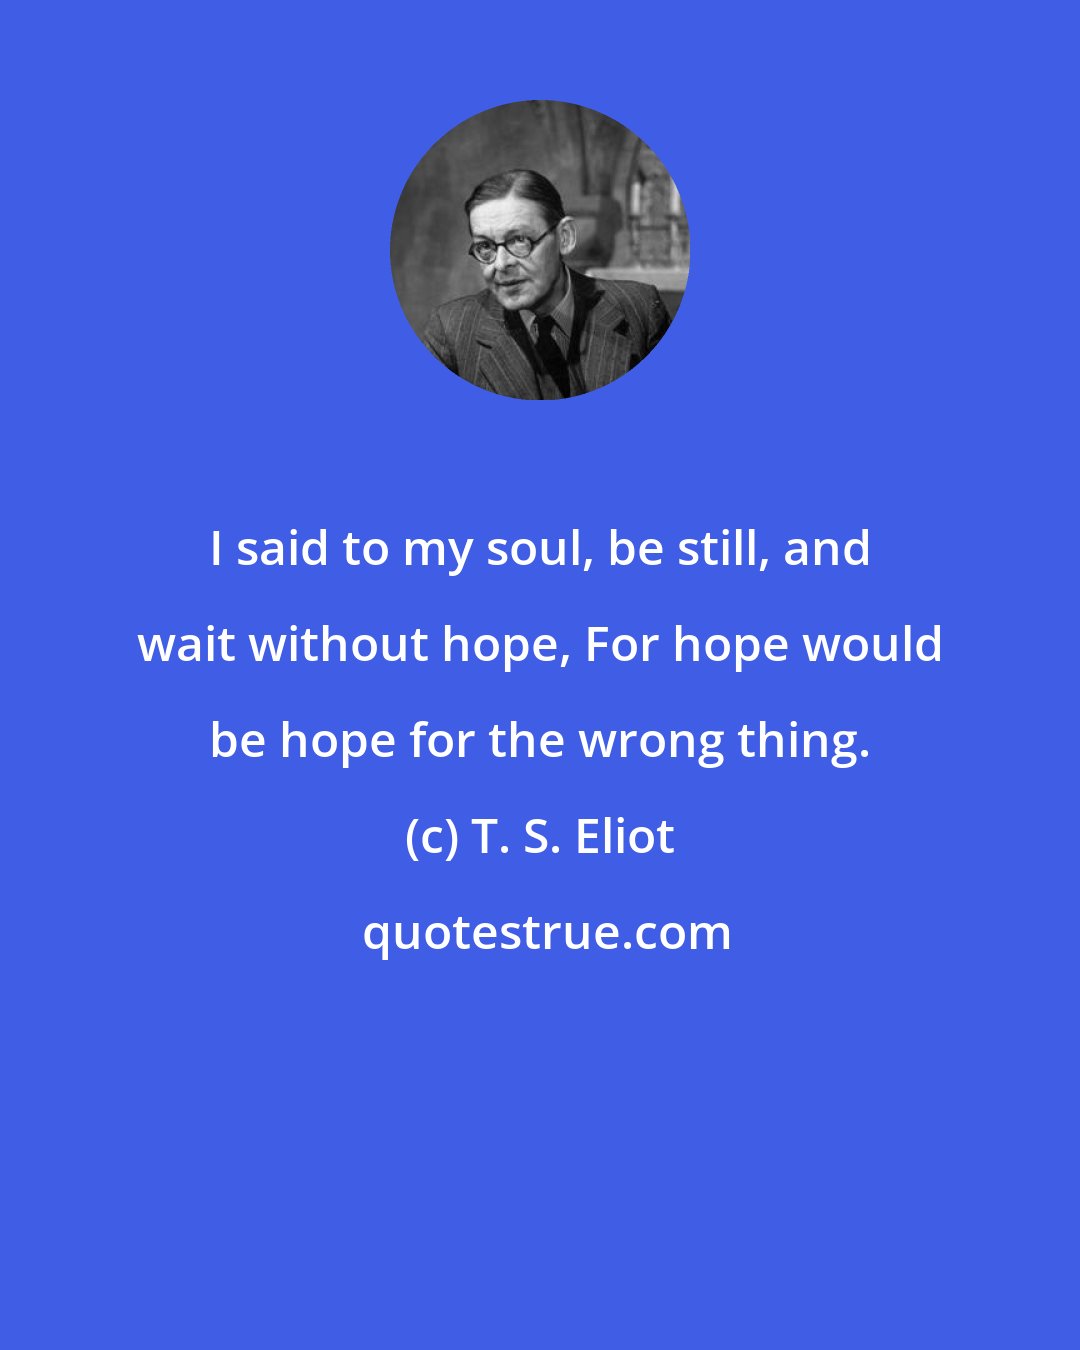 T. S. Eliot: I said to my soul, be still, and wait without hope, For hope would be hope for the wrong thing.